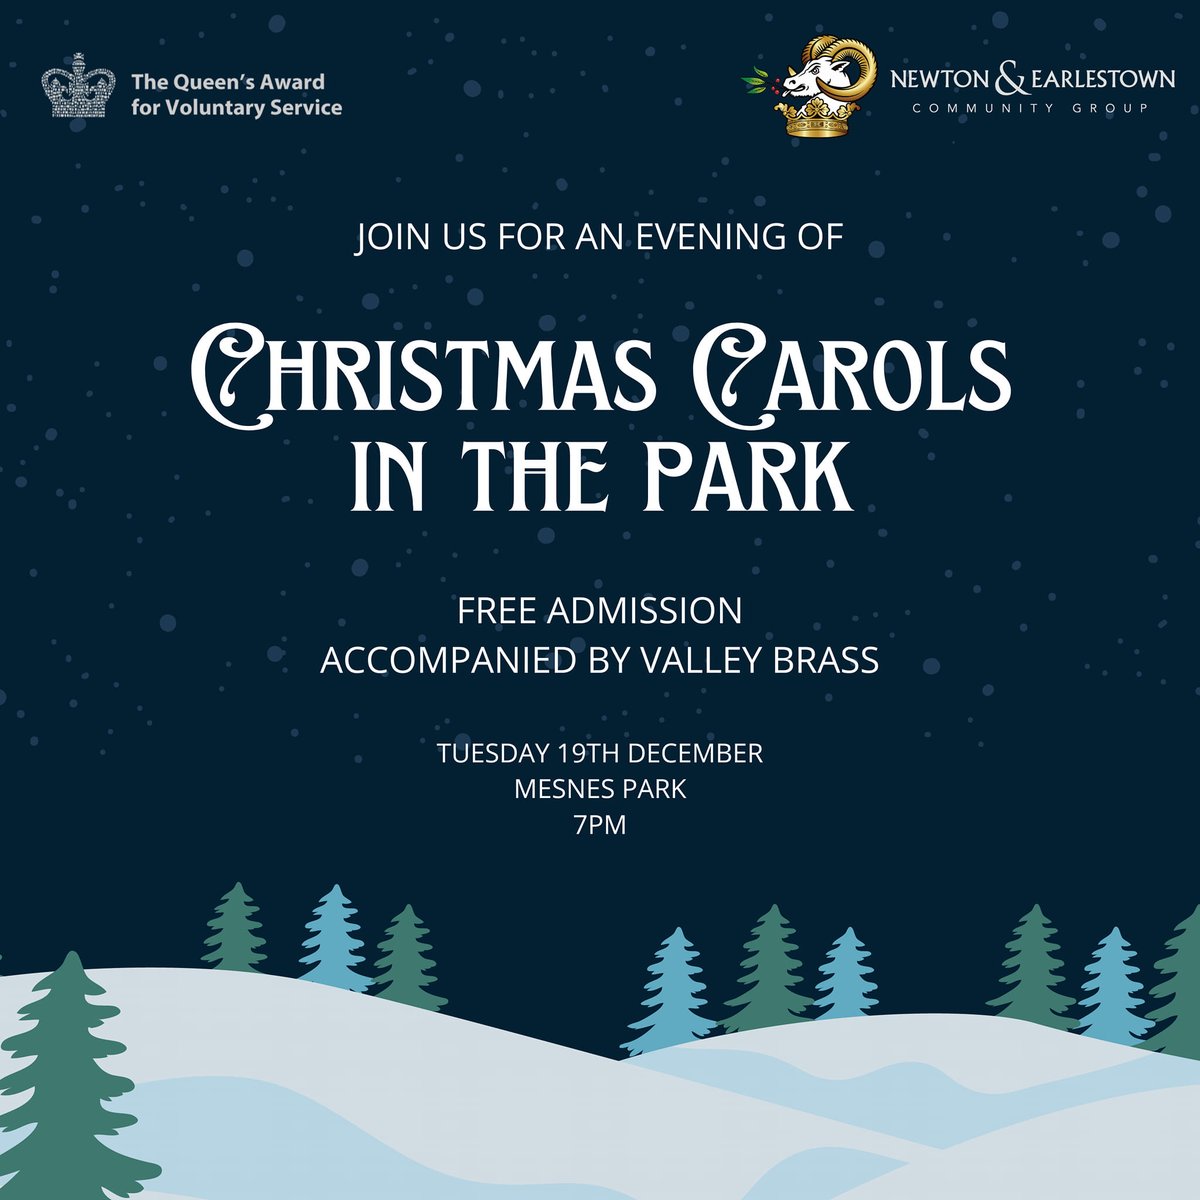 Meet at Mesnes Park Visitor Centre 7pm on Tuesday 19th December. This will be a FREE concert with refreshments available. Join us for a mince pie and a good old fashioned sing along. Music from Valley Brass band. #community #lovenlw All welcome 🎄